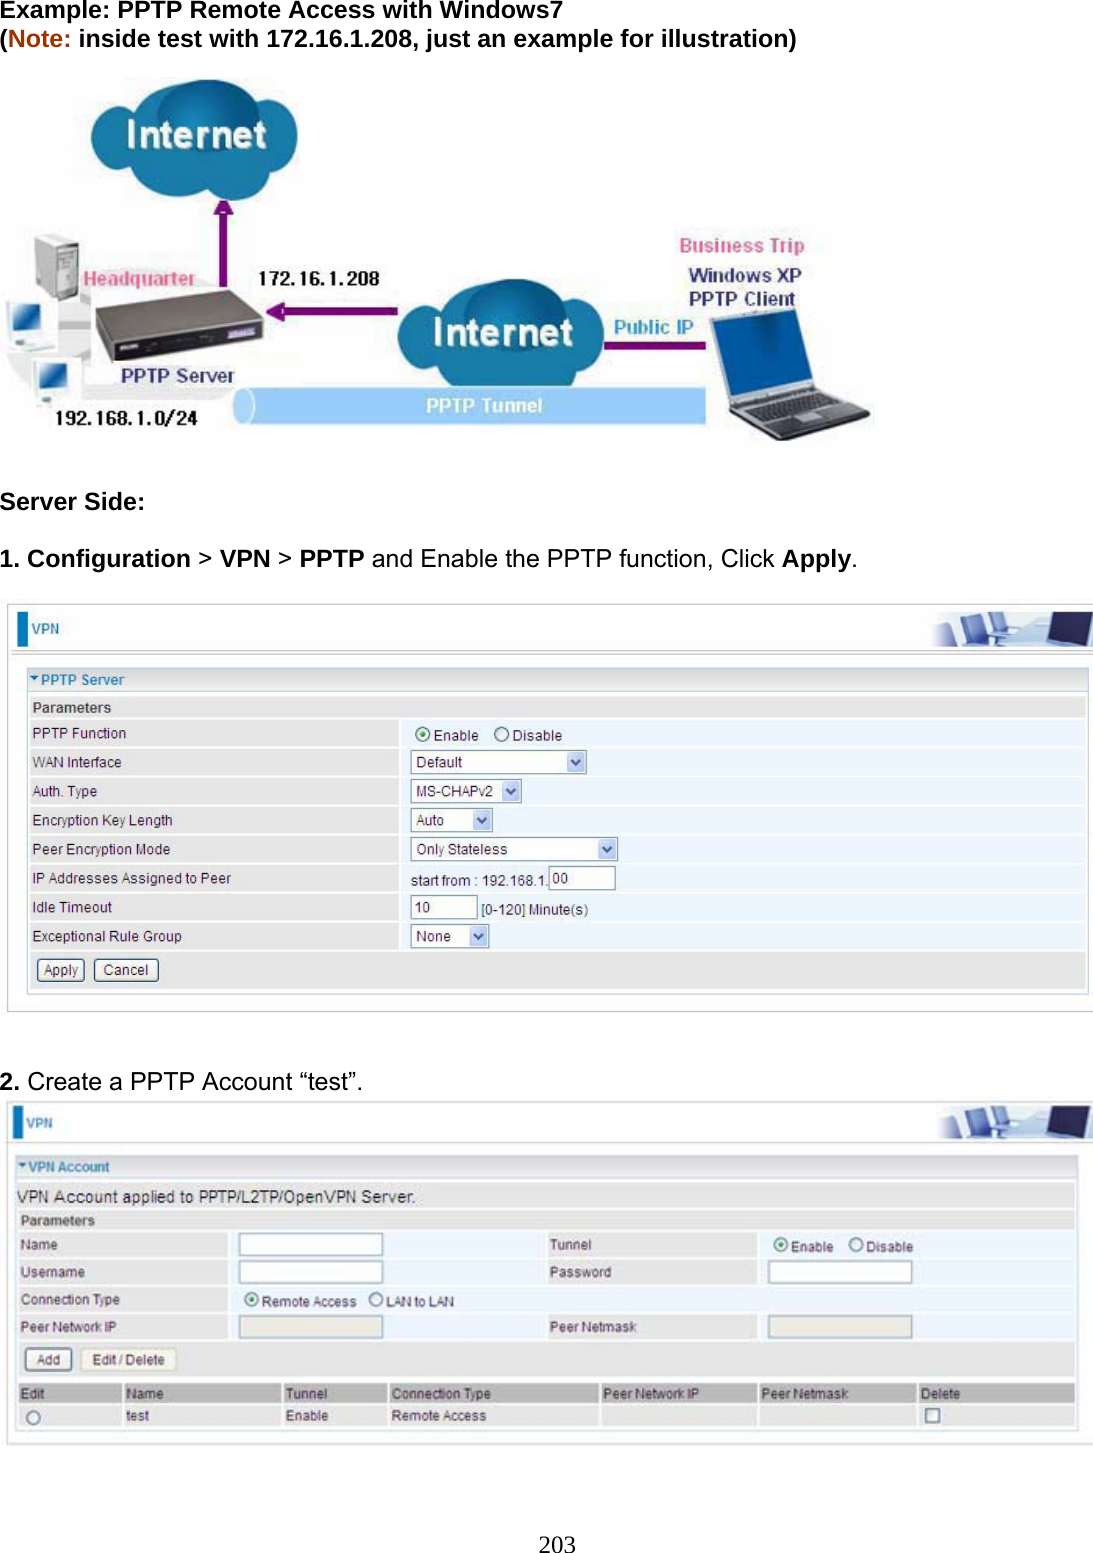 203 Example: PPTP Remote Access with Windows7  (Note: inside test with 172.16.1.208, just an example for illustration)    Server Side:  1. Configuration &gt; VPN &gt; PPTP and Enable the PPTP function, Click Apply.     2. Create a PPTP Account “test”.  